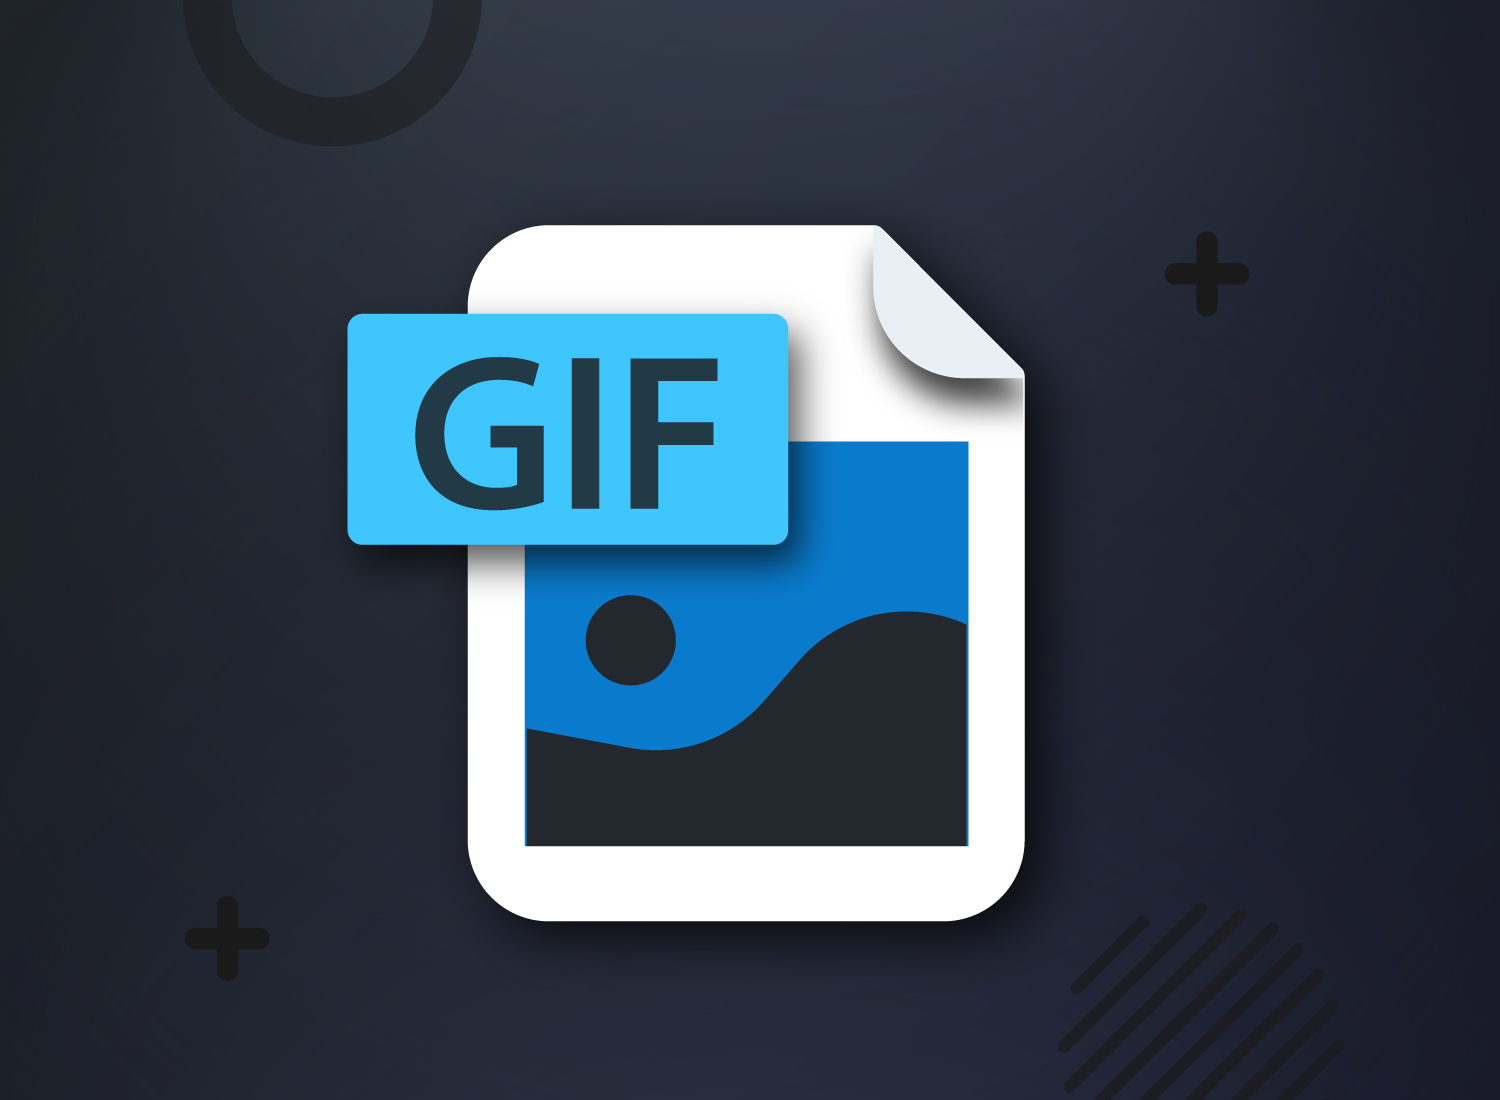 How to use gif at work